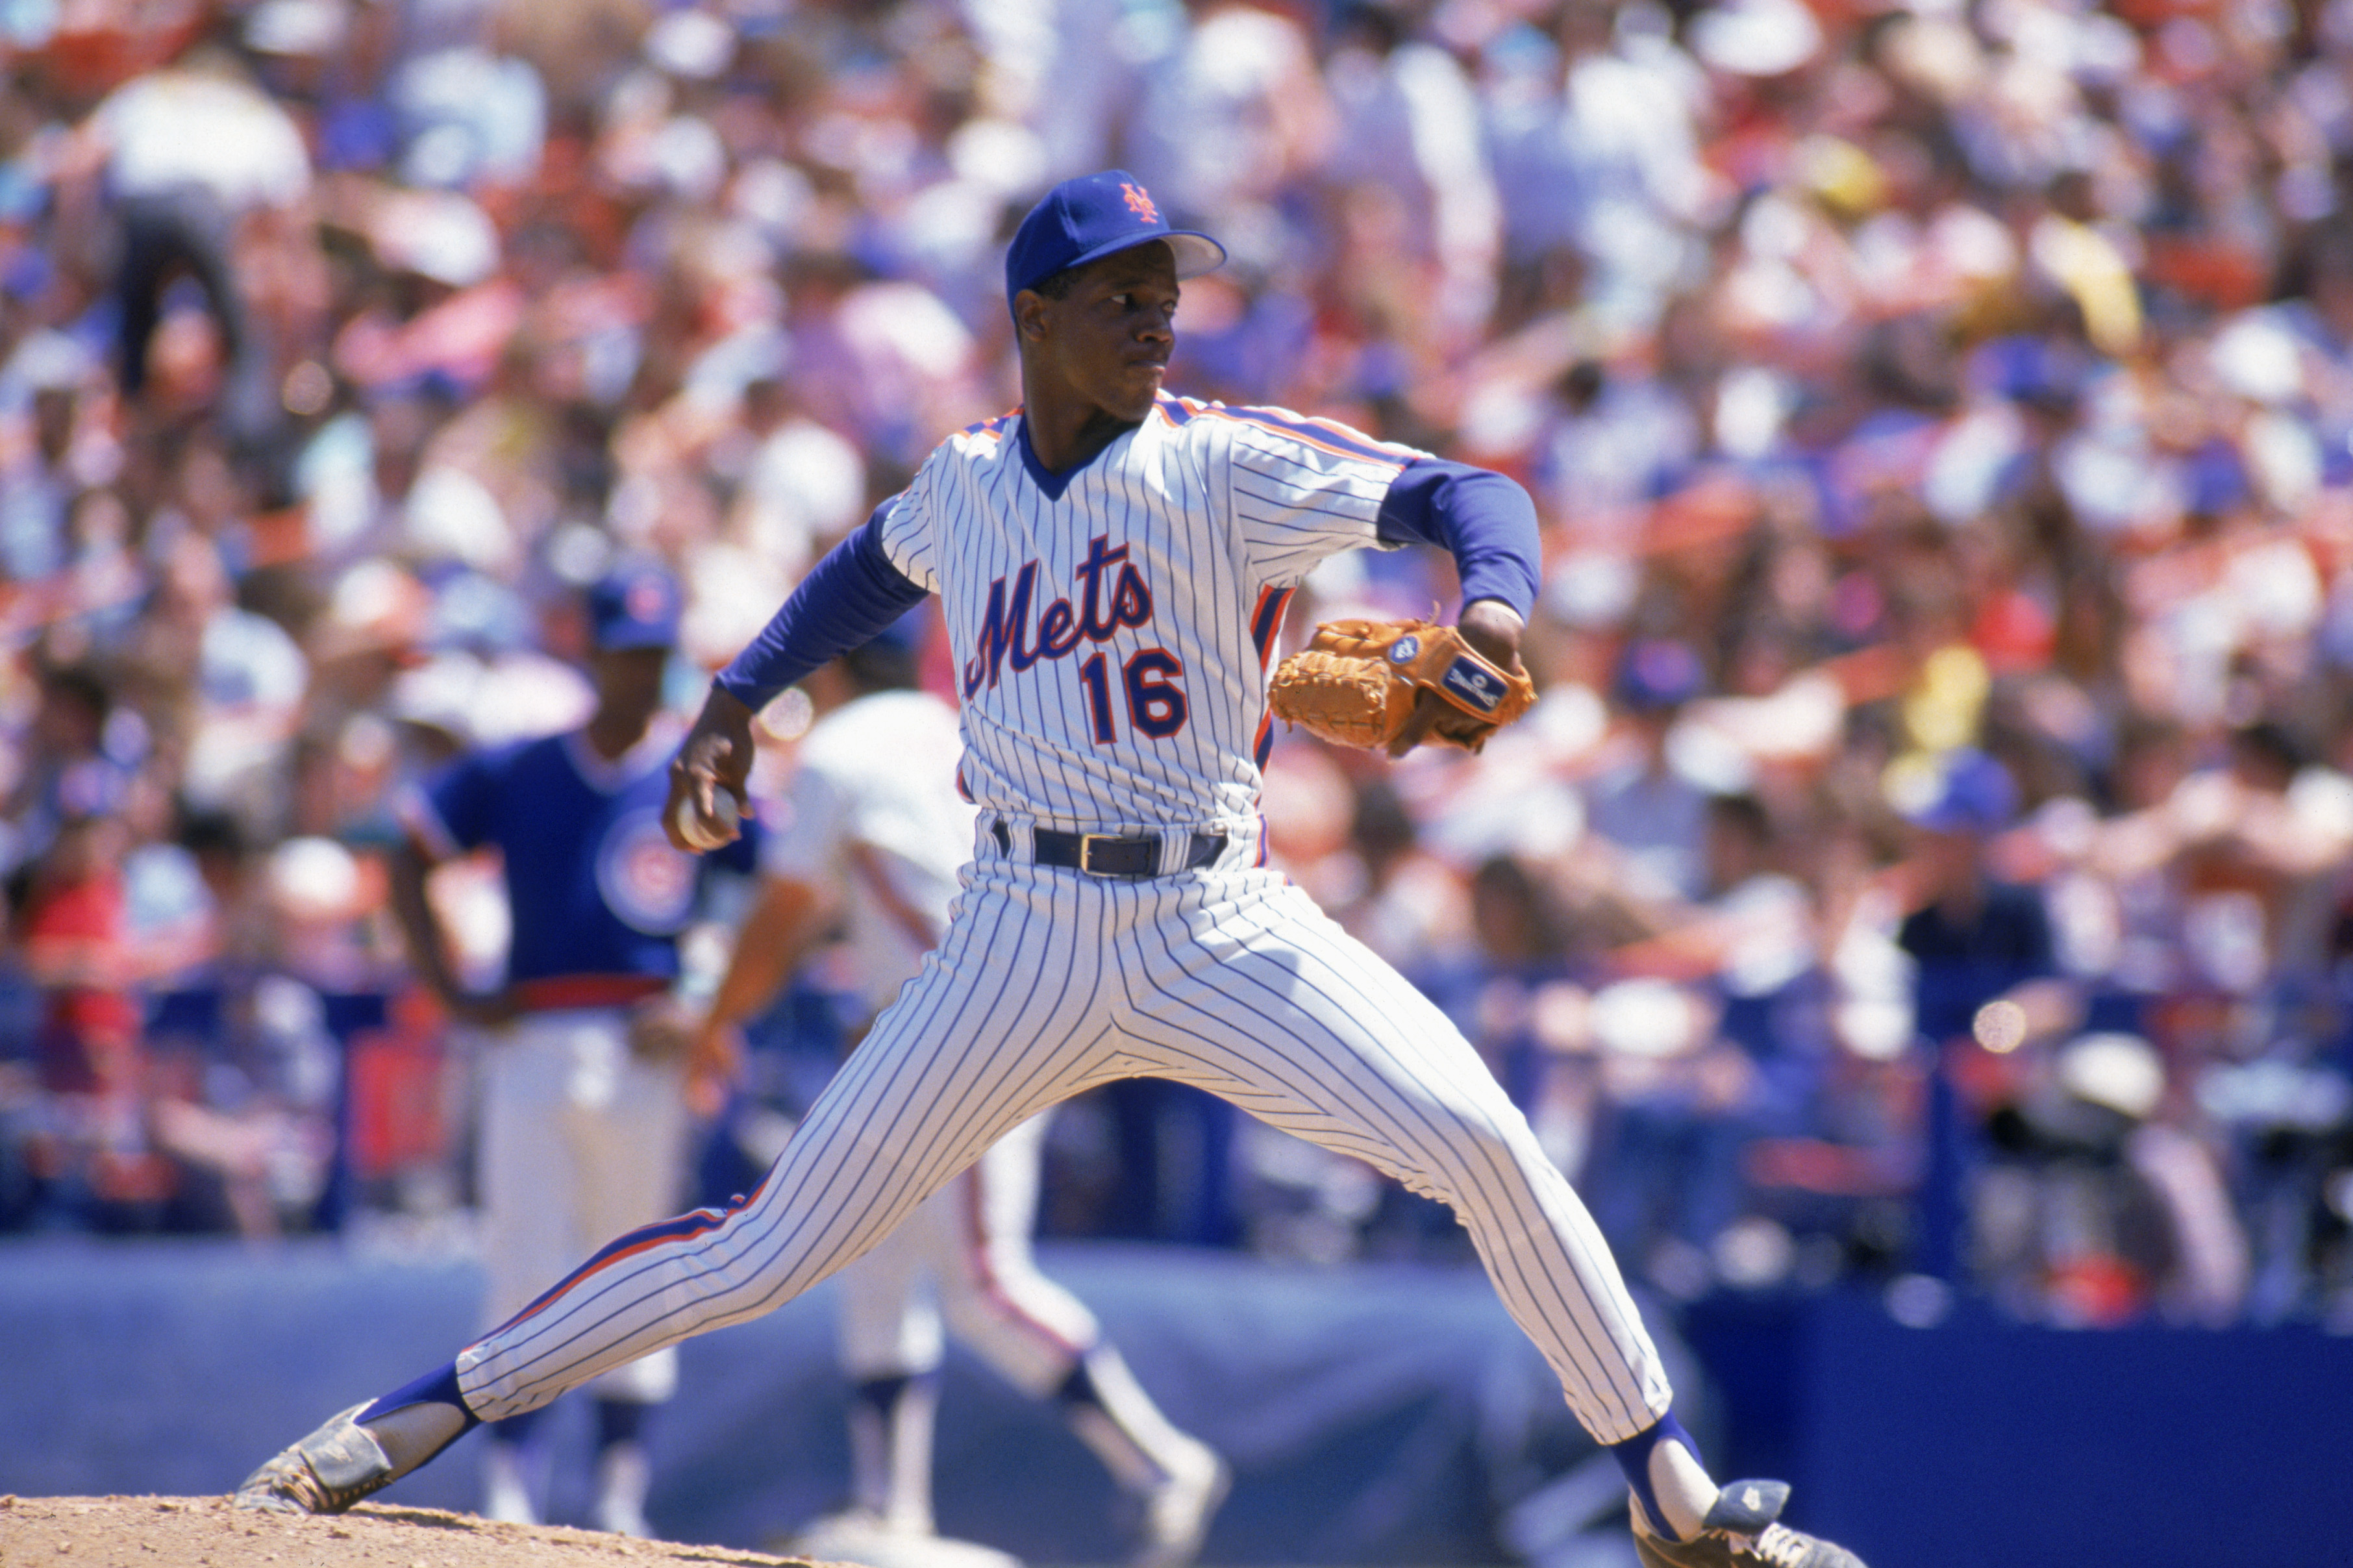 FLUSHING, NY - UNDATED:  Dwight Gooden #16 of the New York Mets delivers a pitch during a game at Shea Stadium circa 1984-1994 in Flushing, New York.  (Photo by Scott Halleran/Getty Images)